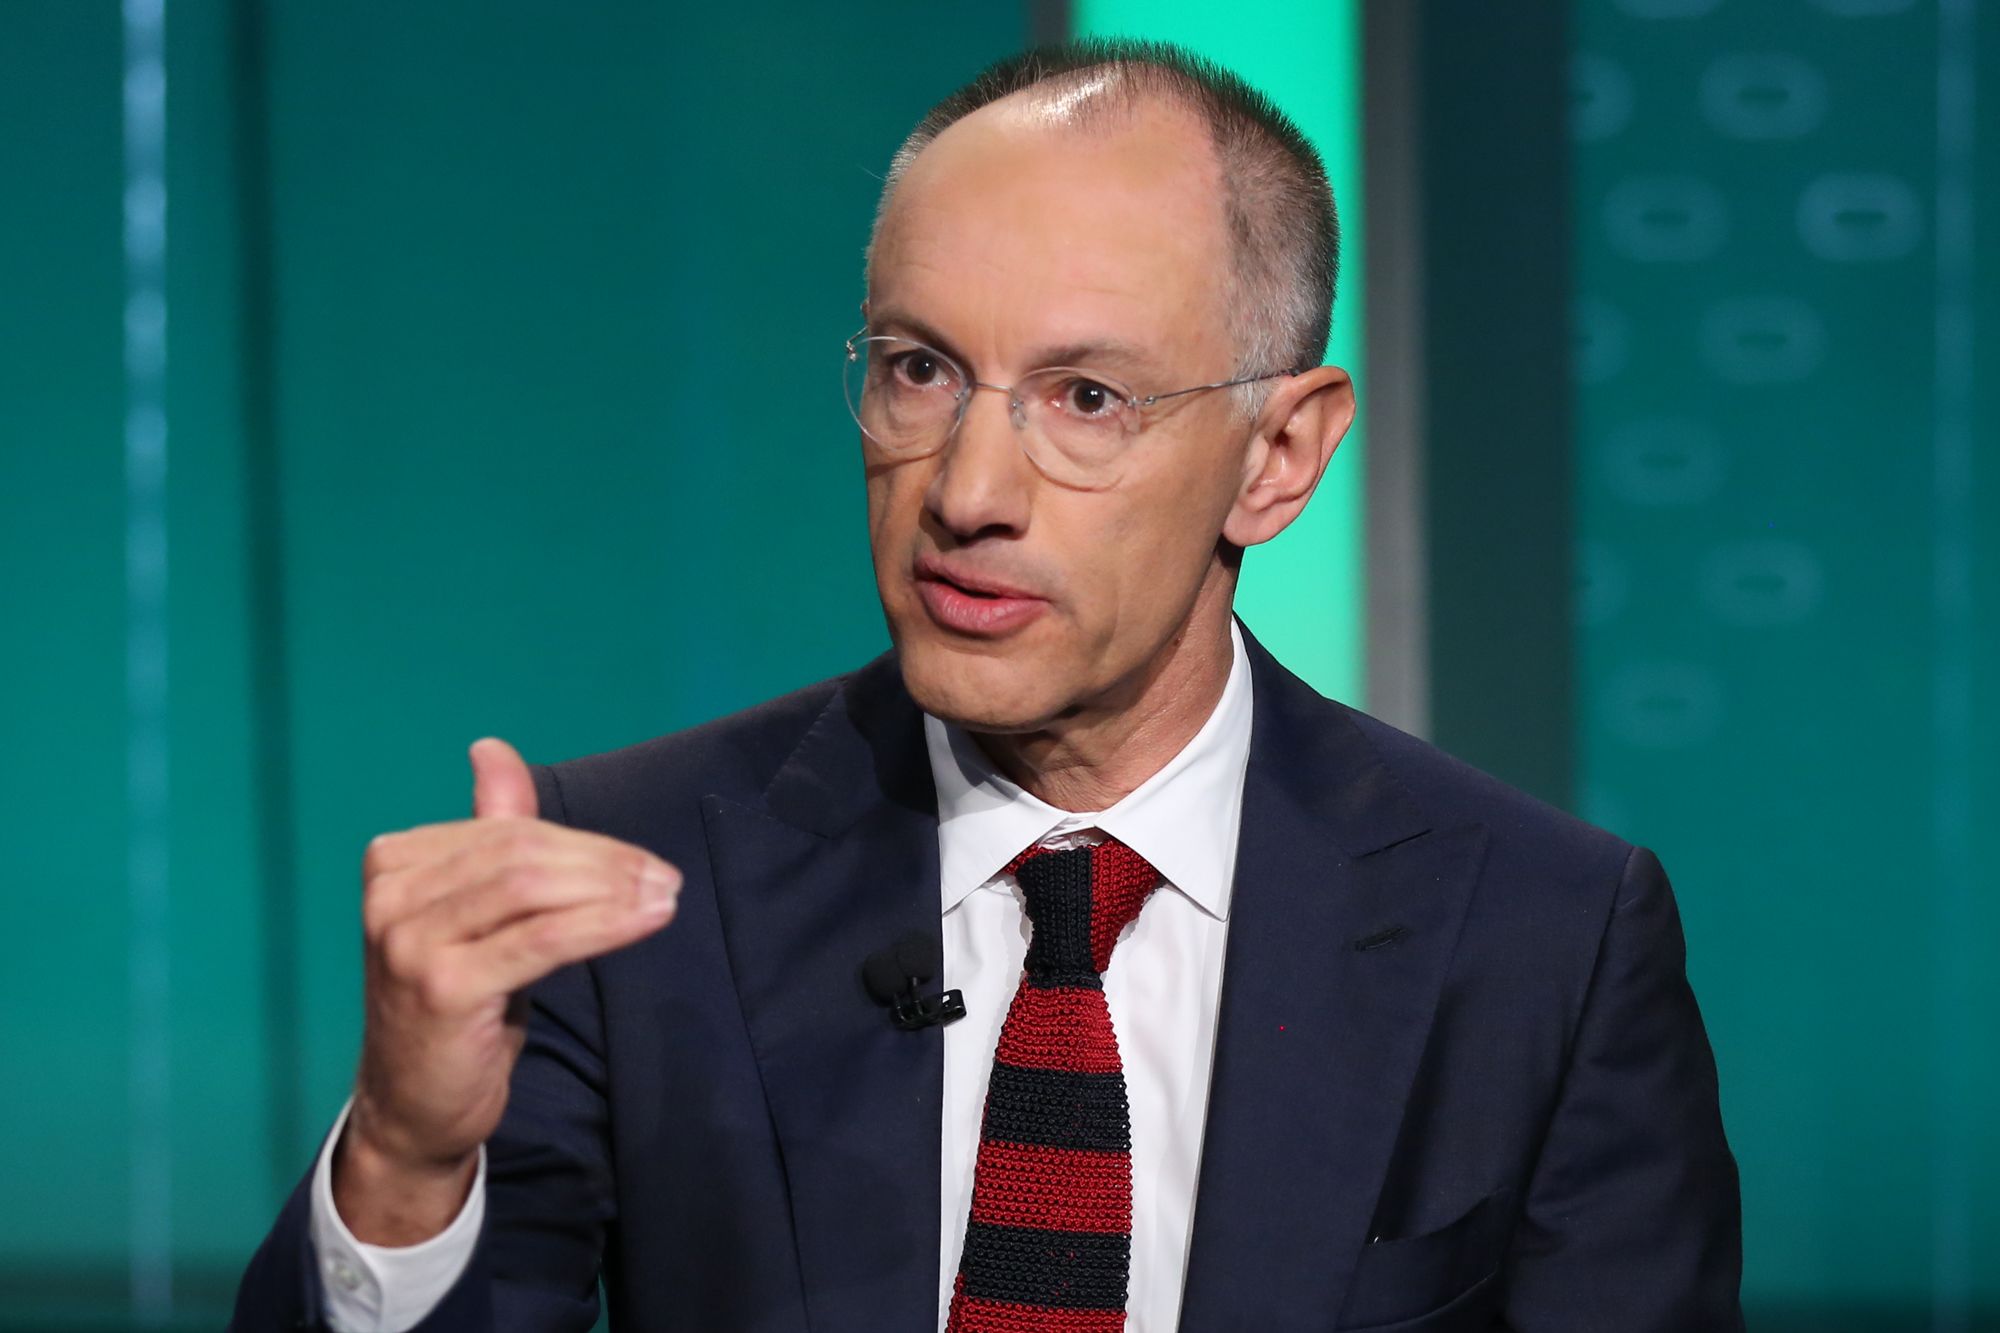 Michael Moritz of Sequoia compares IPO bankers to ticket scalpers